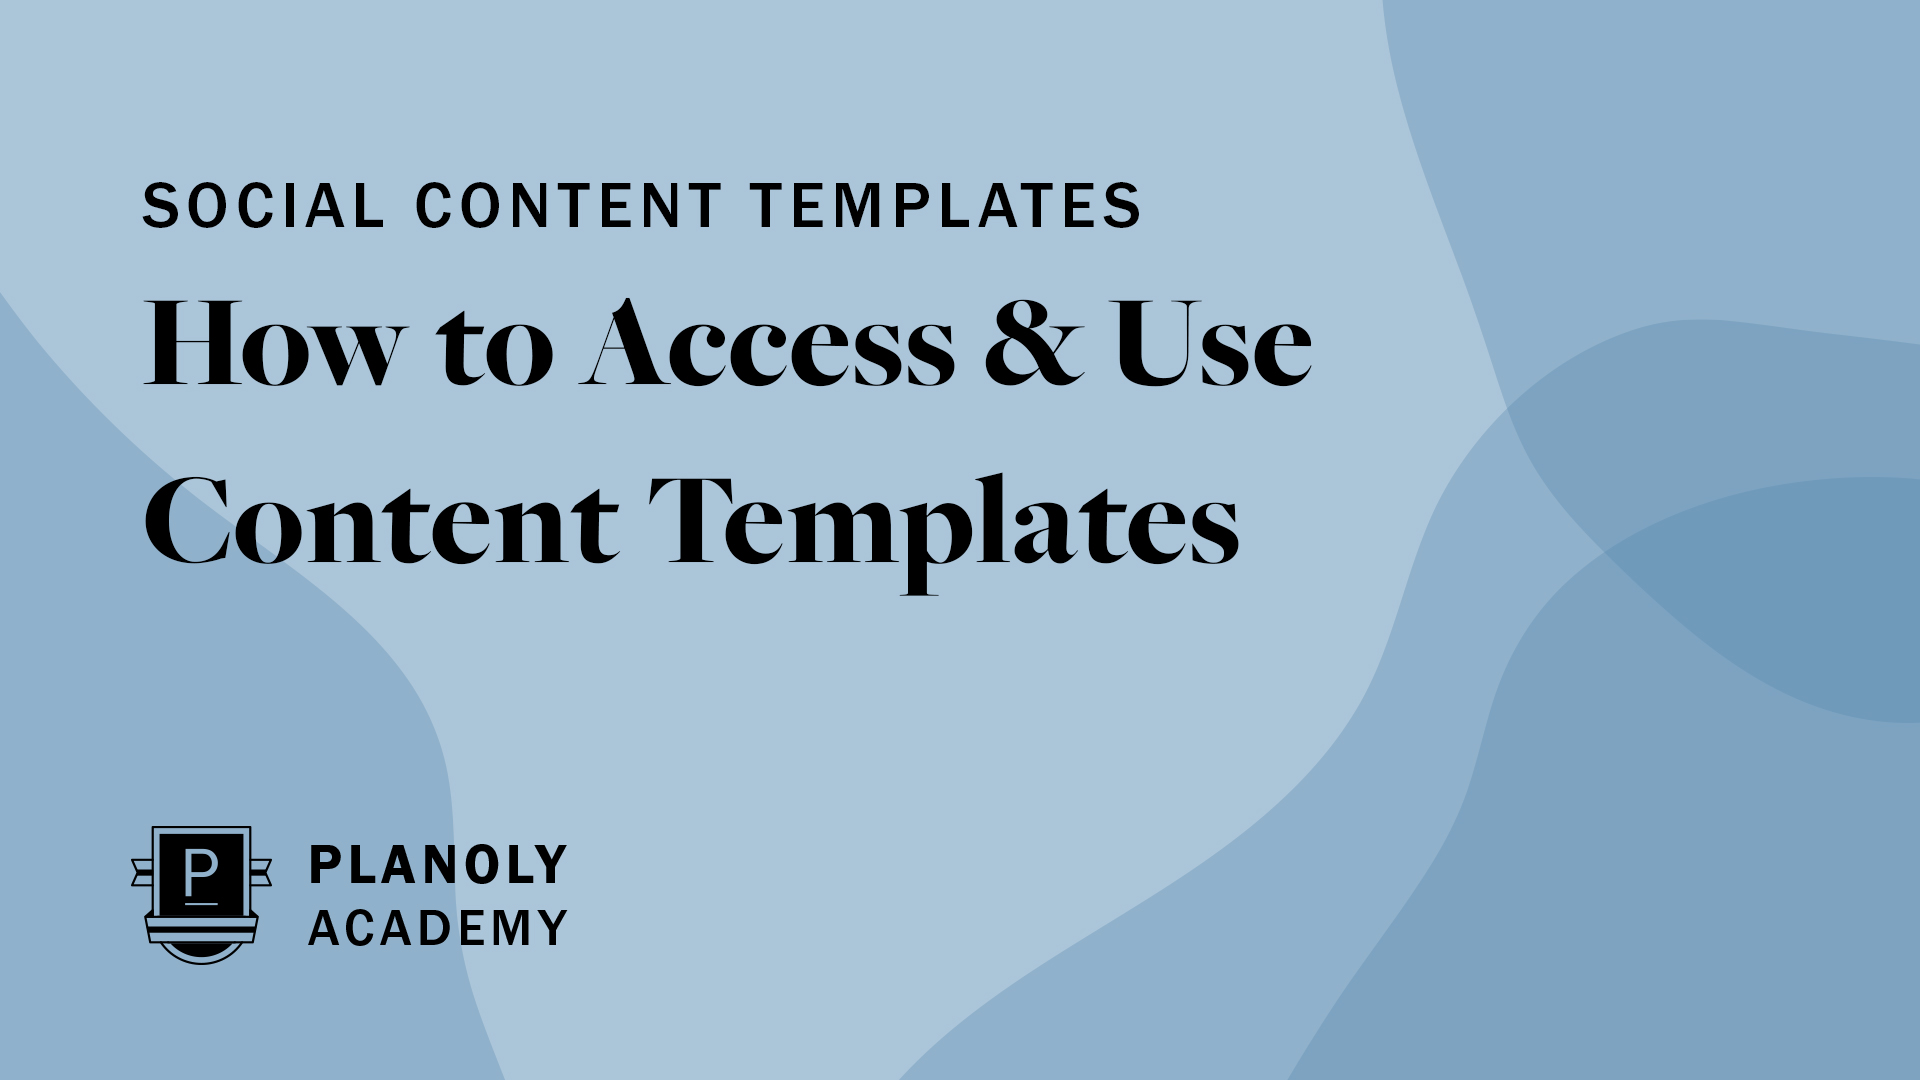 How to Access & Use Content Templates